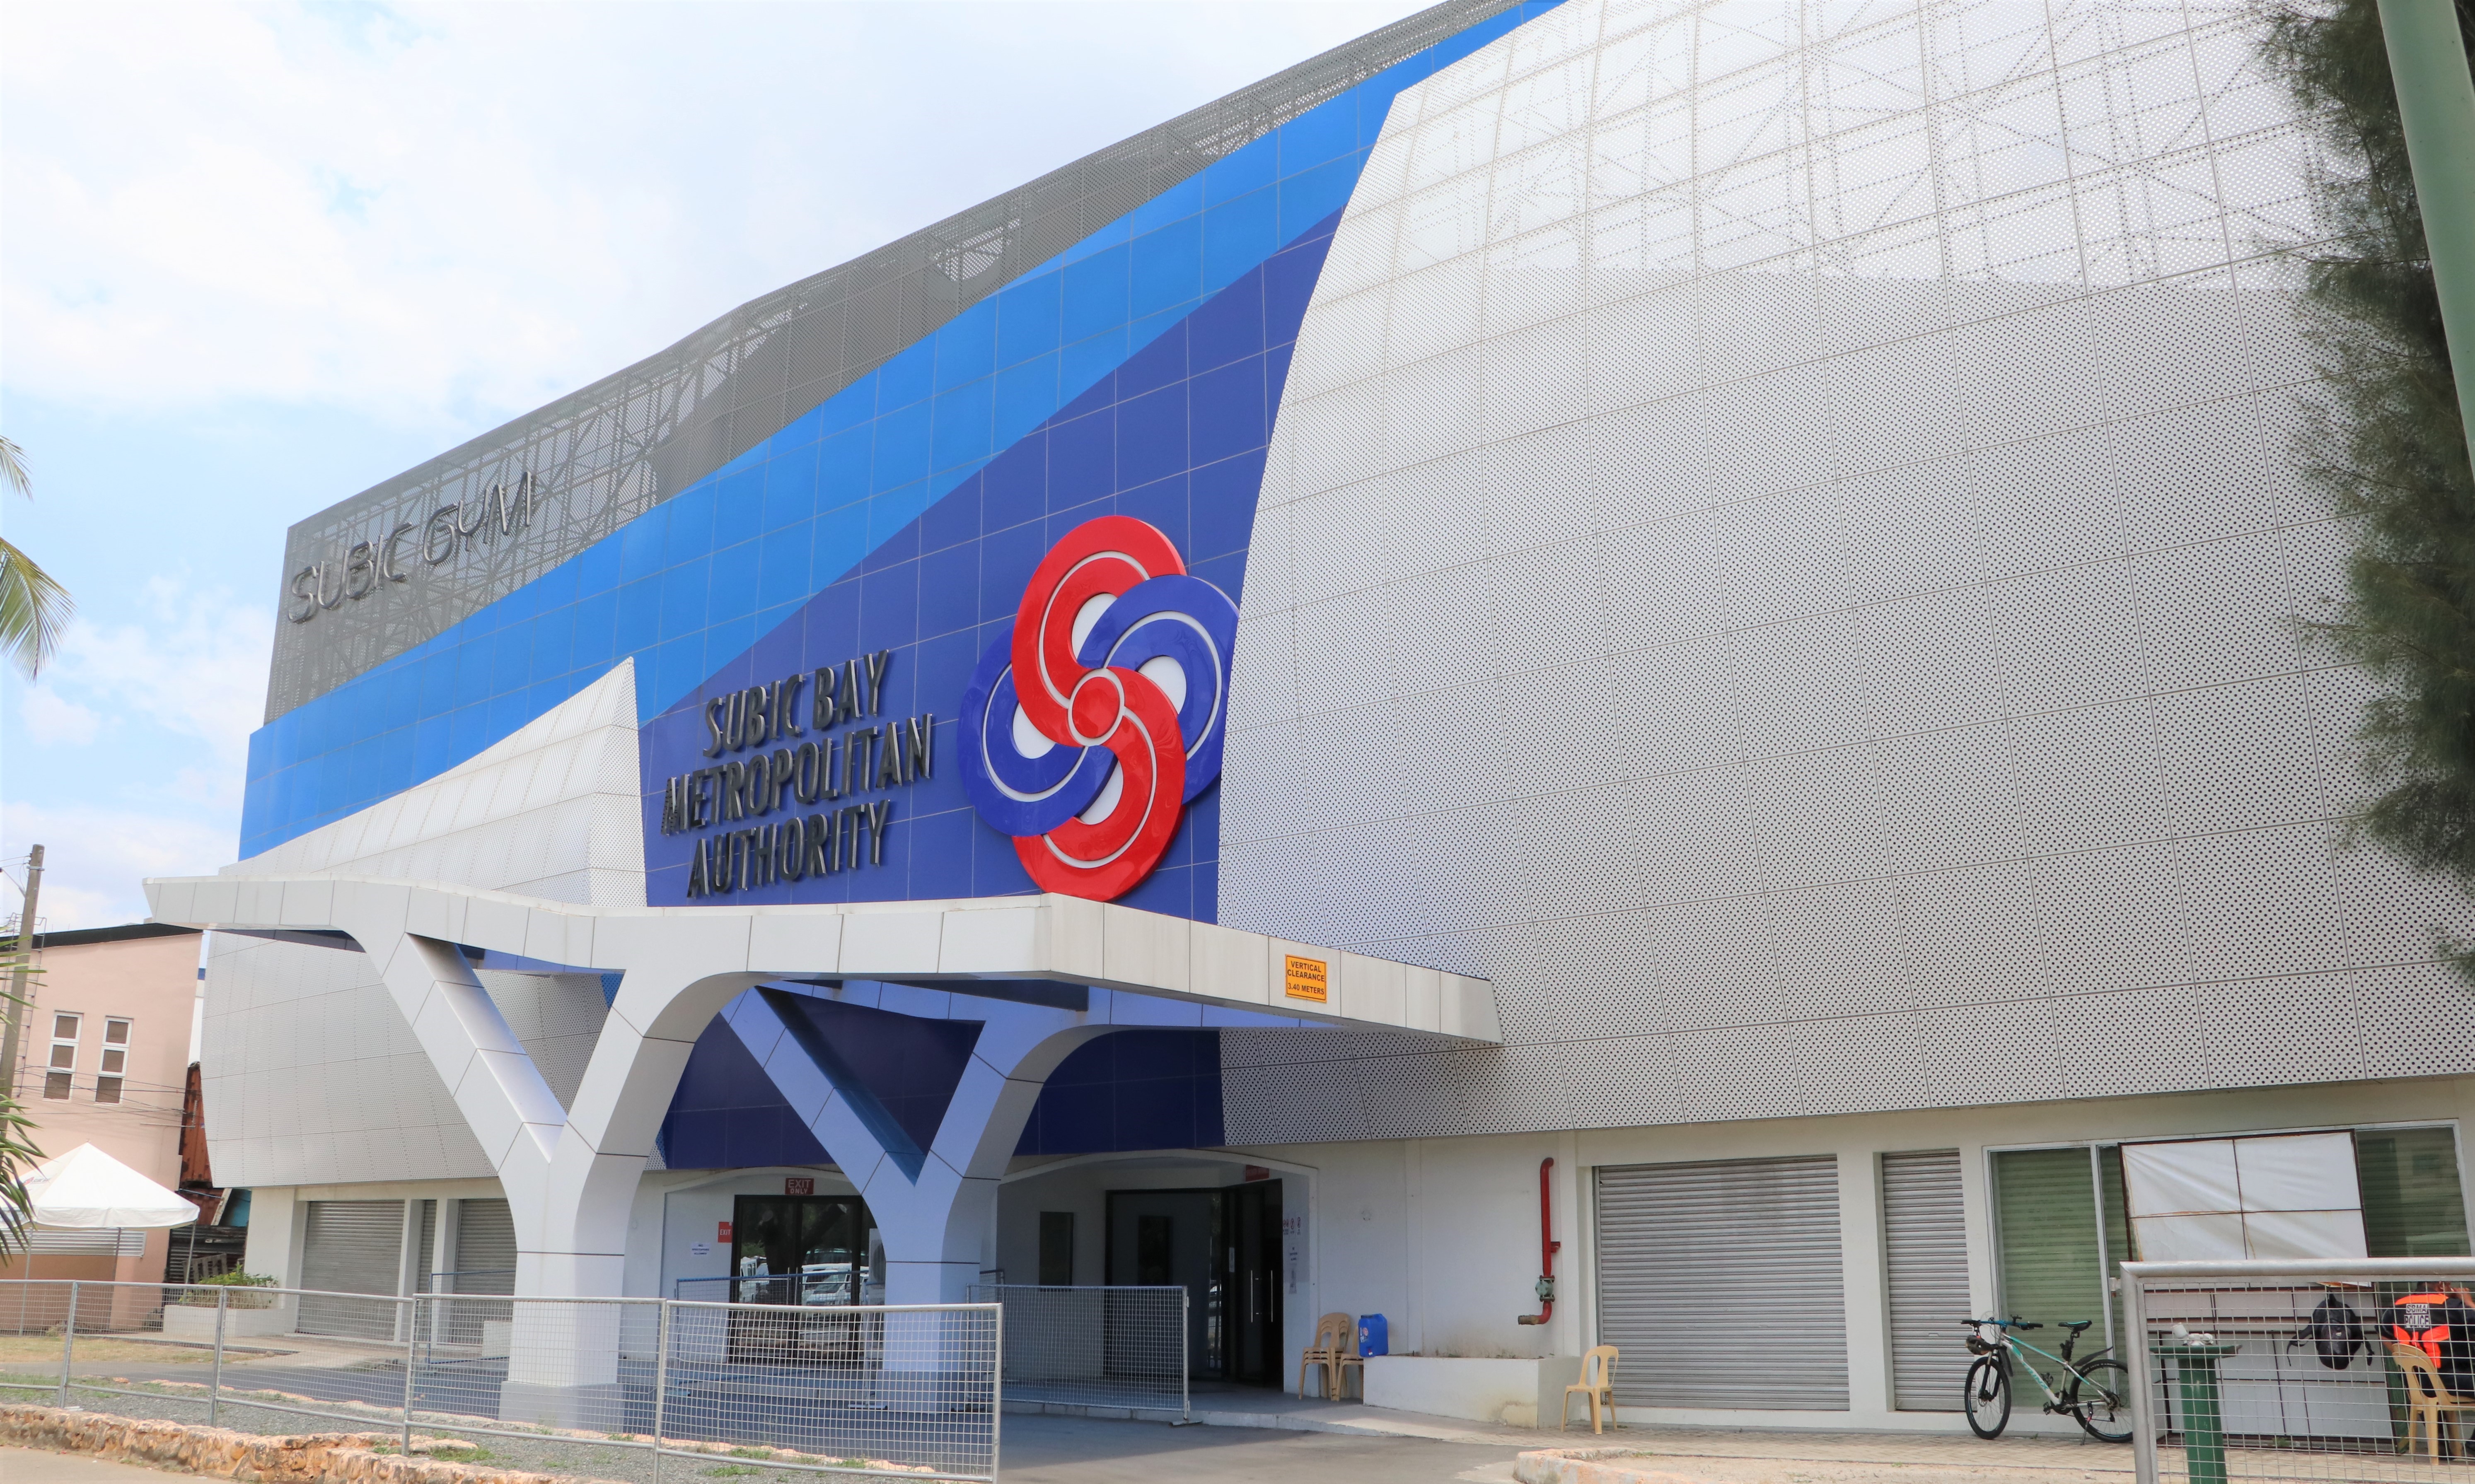 The Subic Gym will be the venue for the upcoming Filipino Basketball League inaugural games